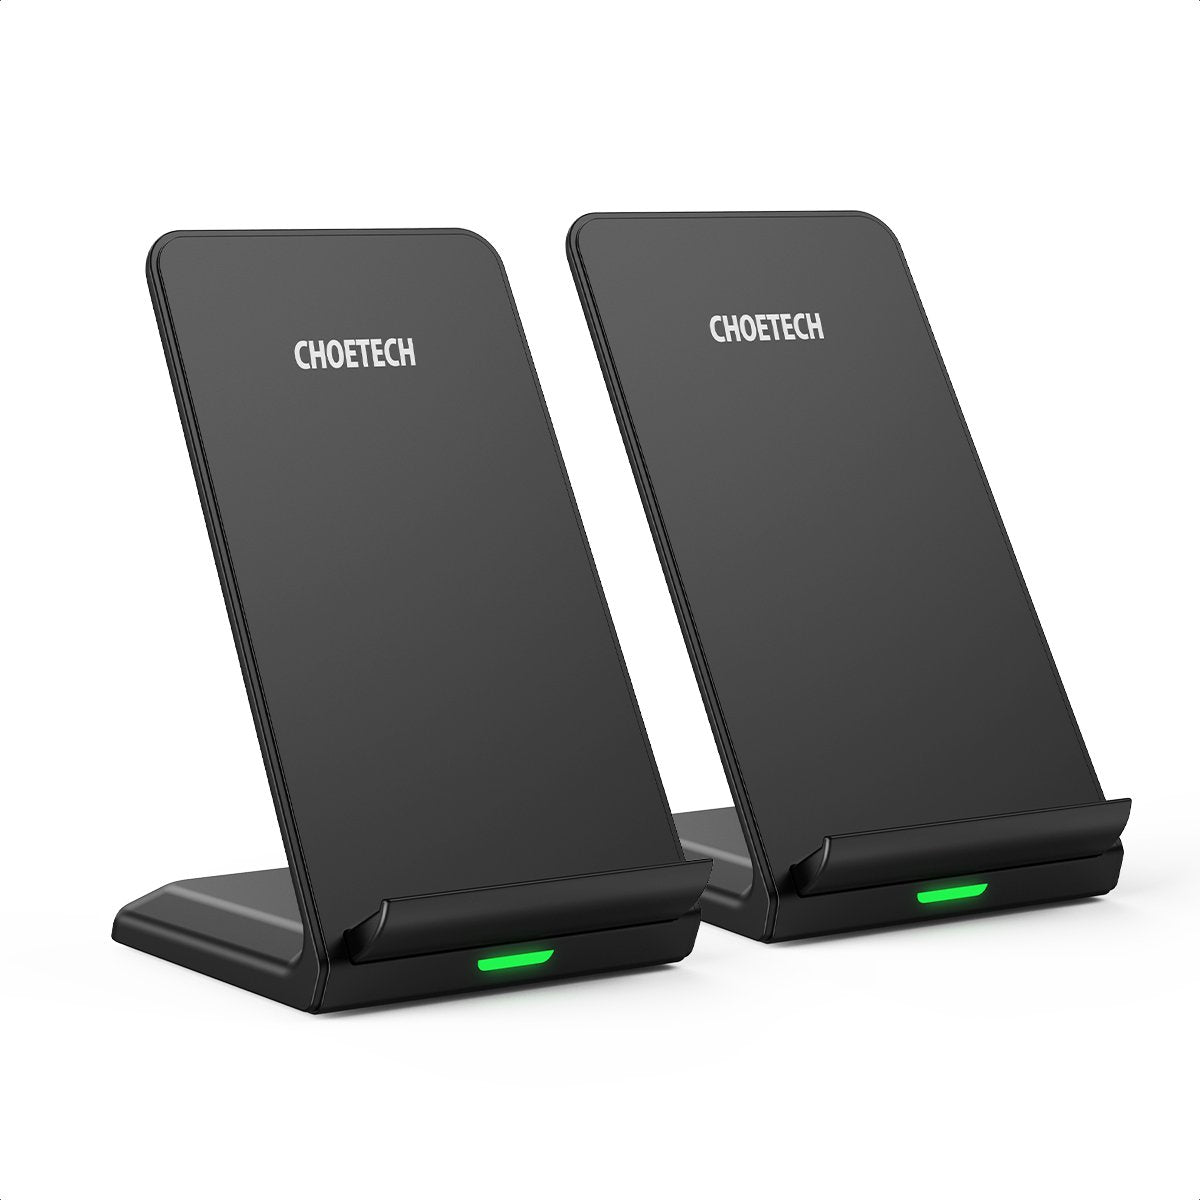 MIX00093 Choetech [2 Pack] 10W Max Qi-Certified Fast Wireless Charging Stand Compatible with iPhone 12